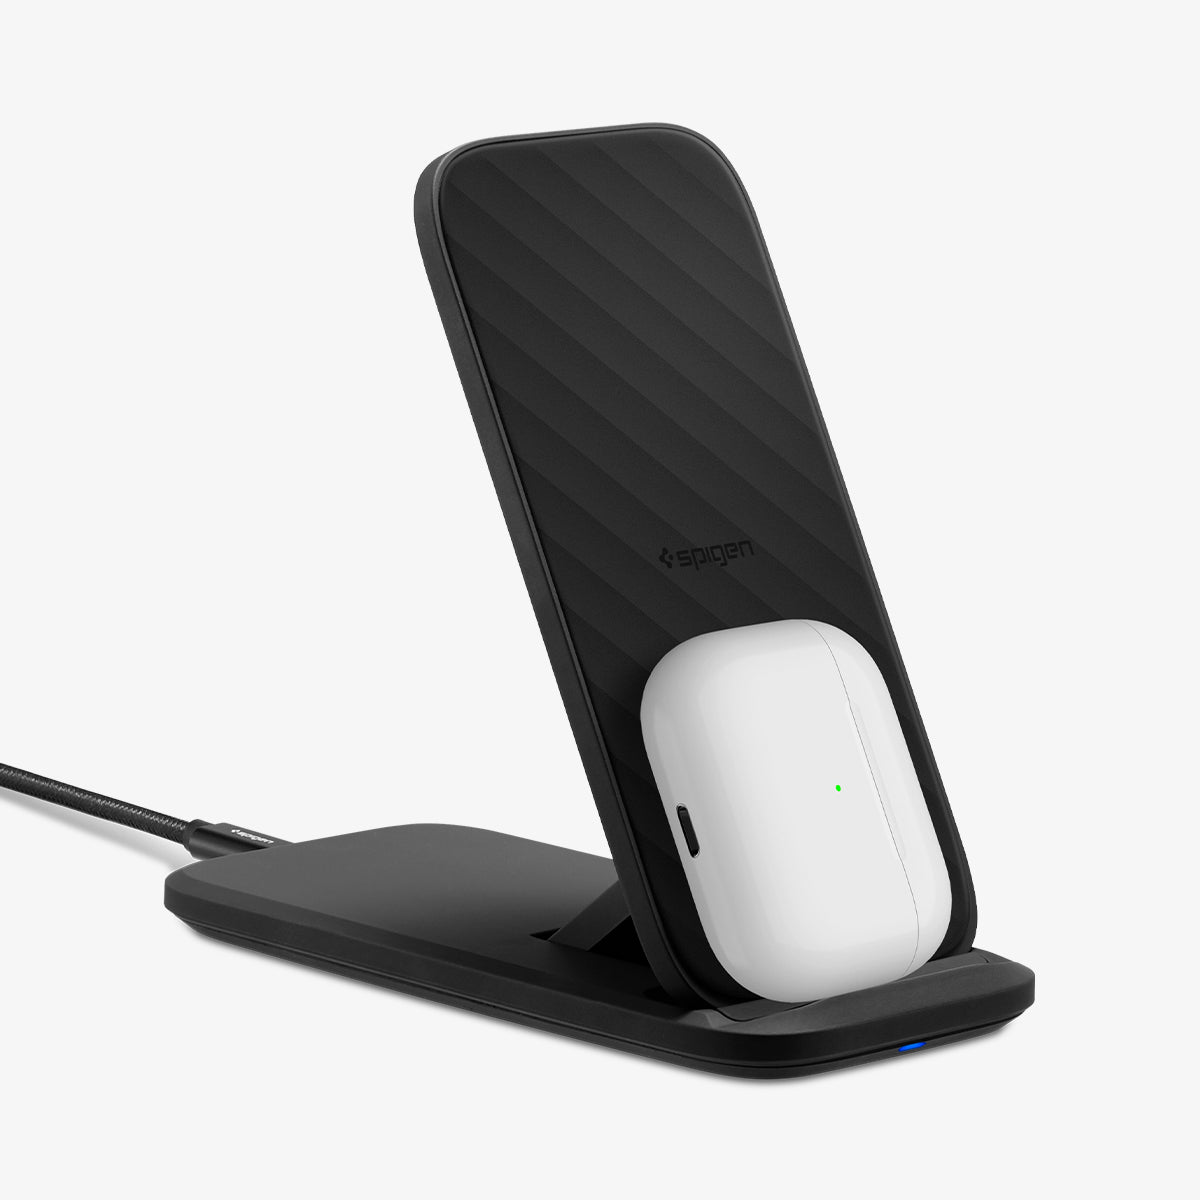 000CH25521 - SteadiBoost™ Flex 15W Wireless Charger F316W in black showing the front and side with stand upright and airpods charging